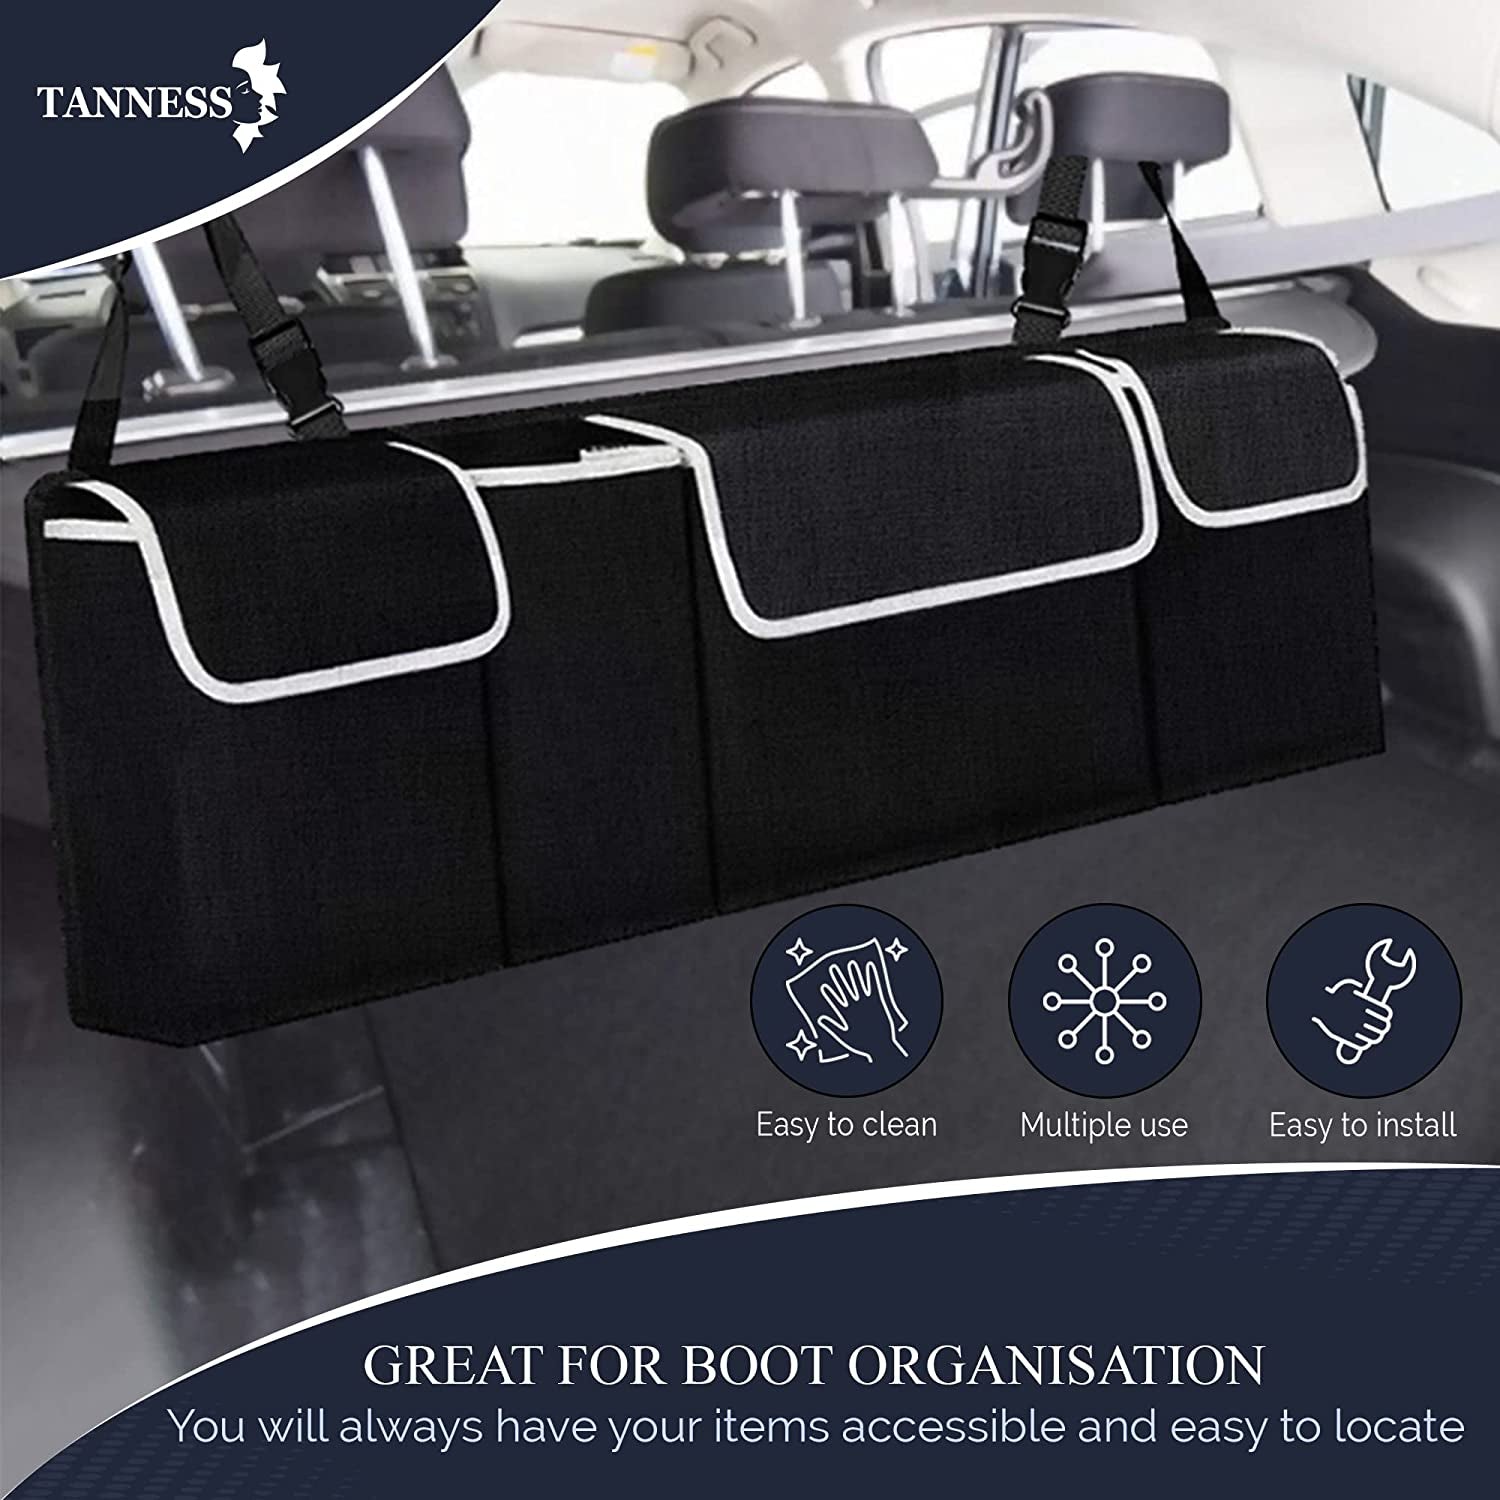 Car Boot Seat Organiser with Adjustable Straps - Storage Accessories Organisers - Seat Back Protectors, Medium Large Interior Travel Storage, Foldable Cargo Net Car Backseat Cover Gadgets